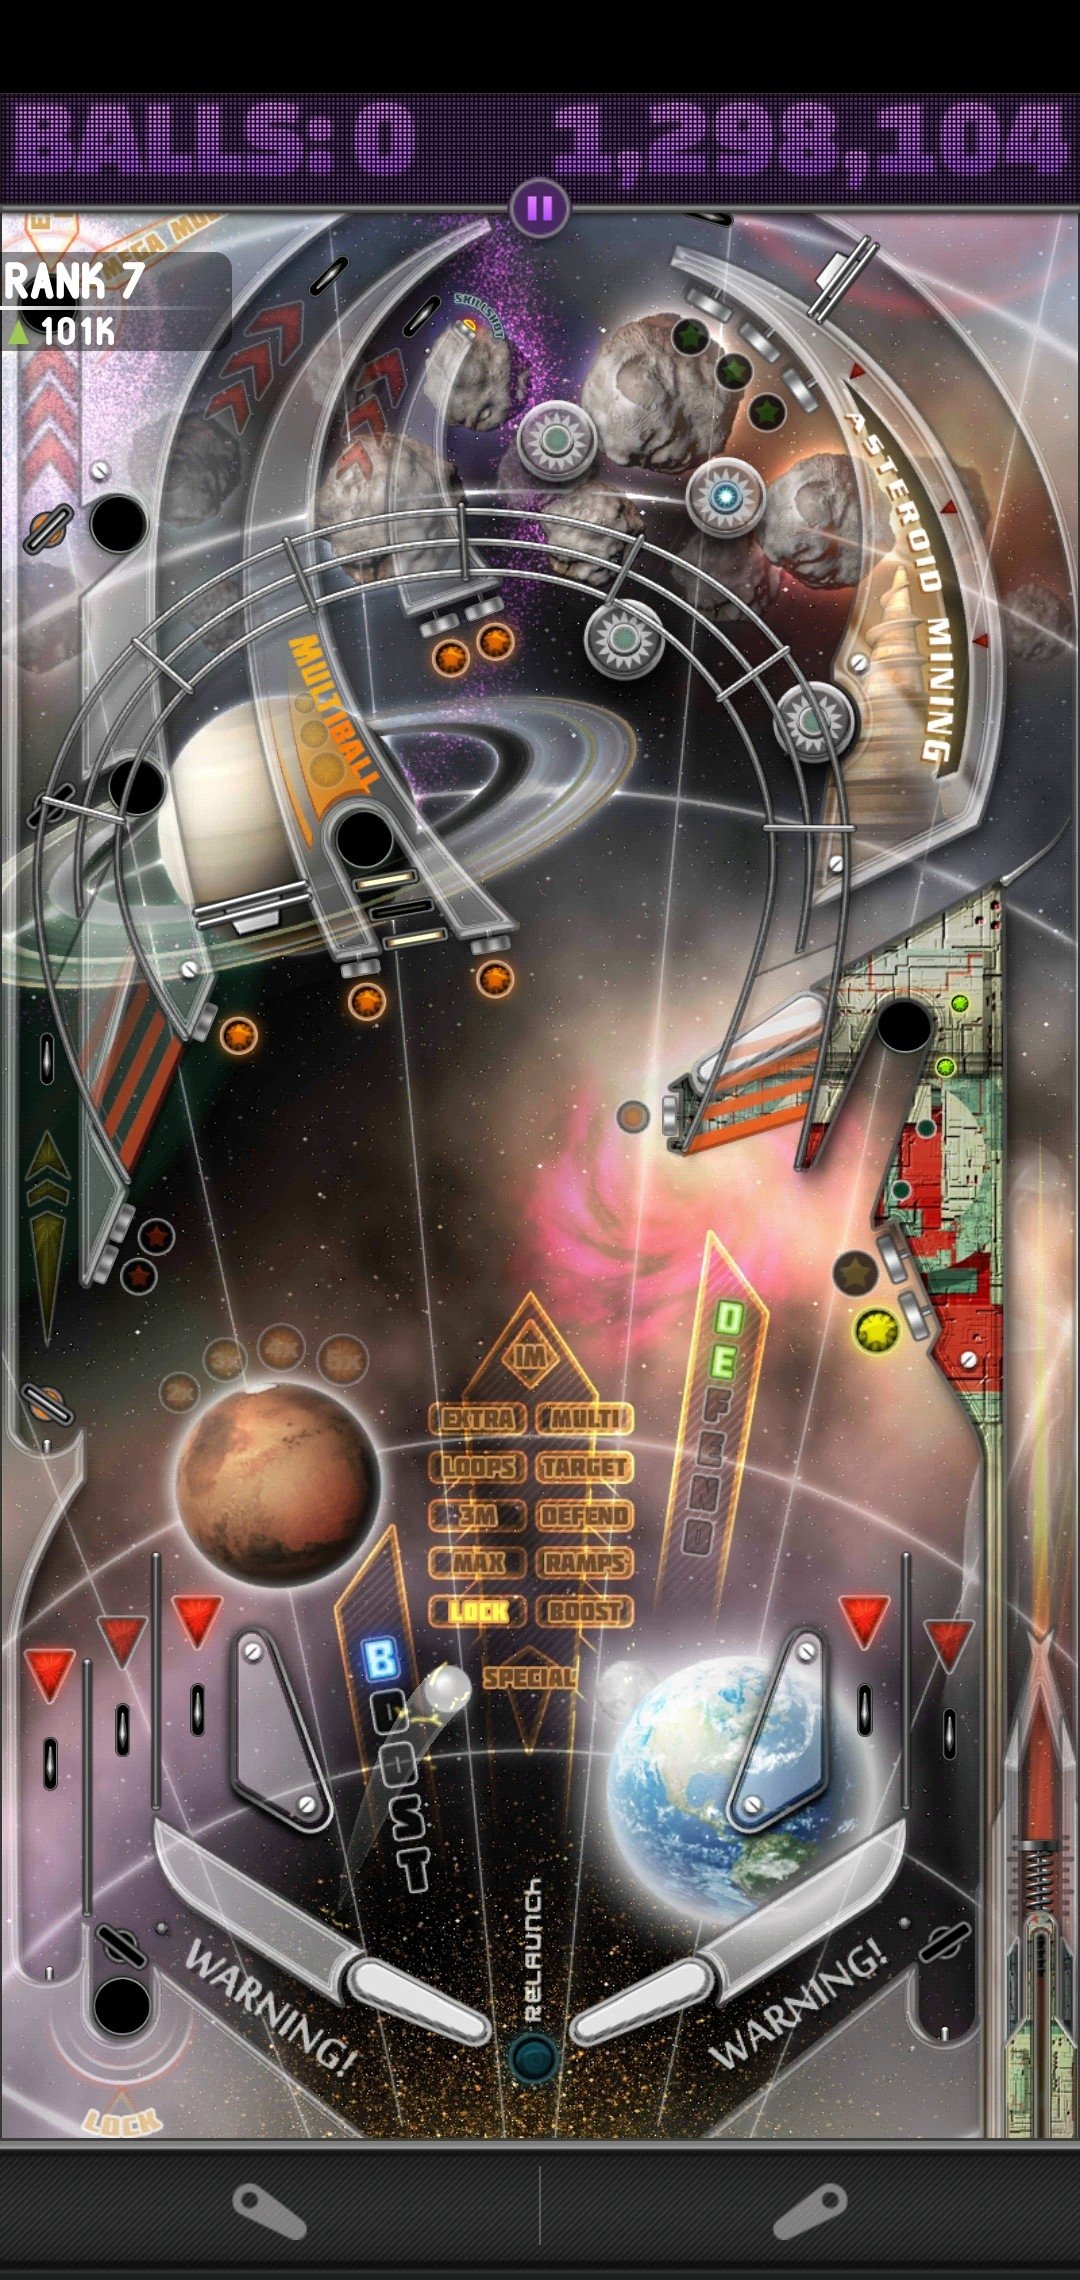 Pinball Star download the last version for mac